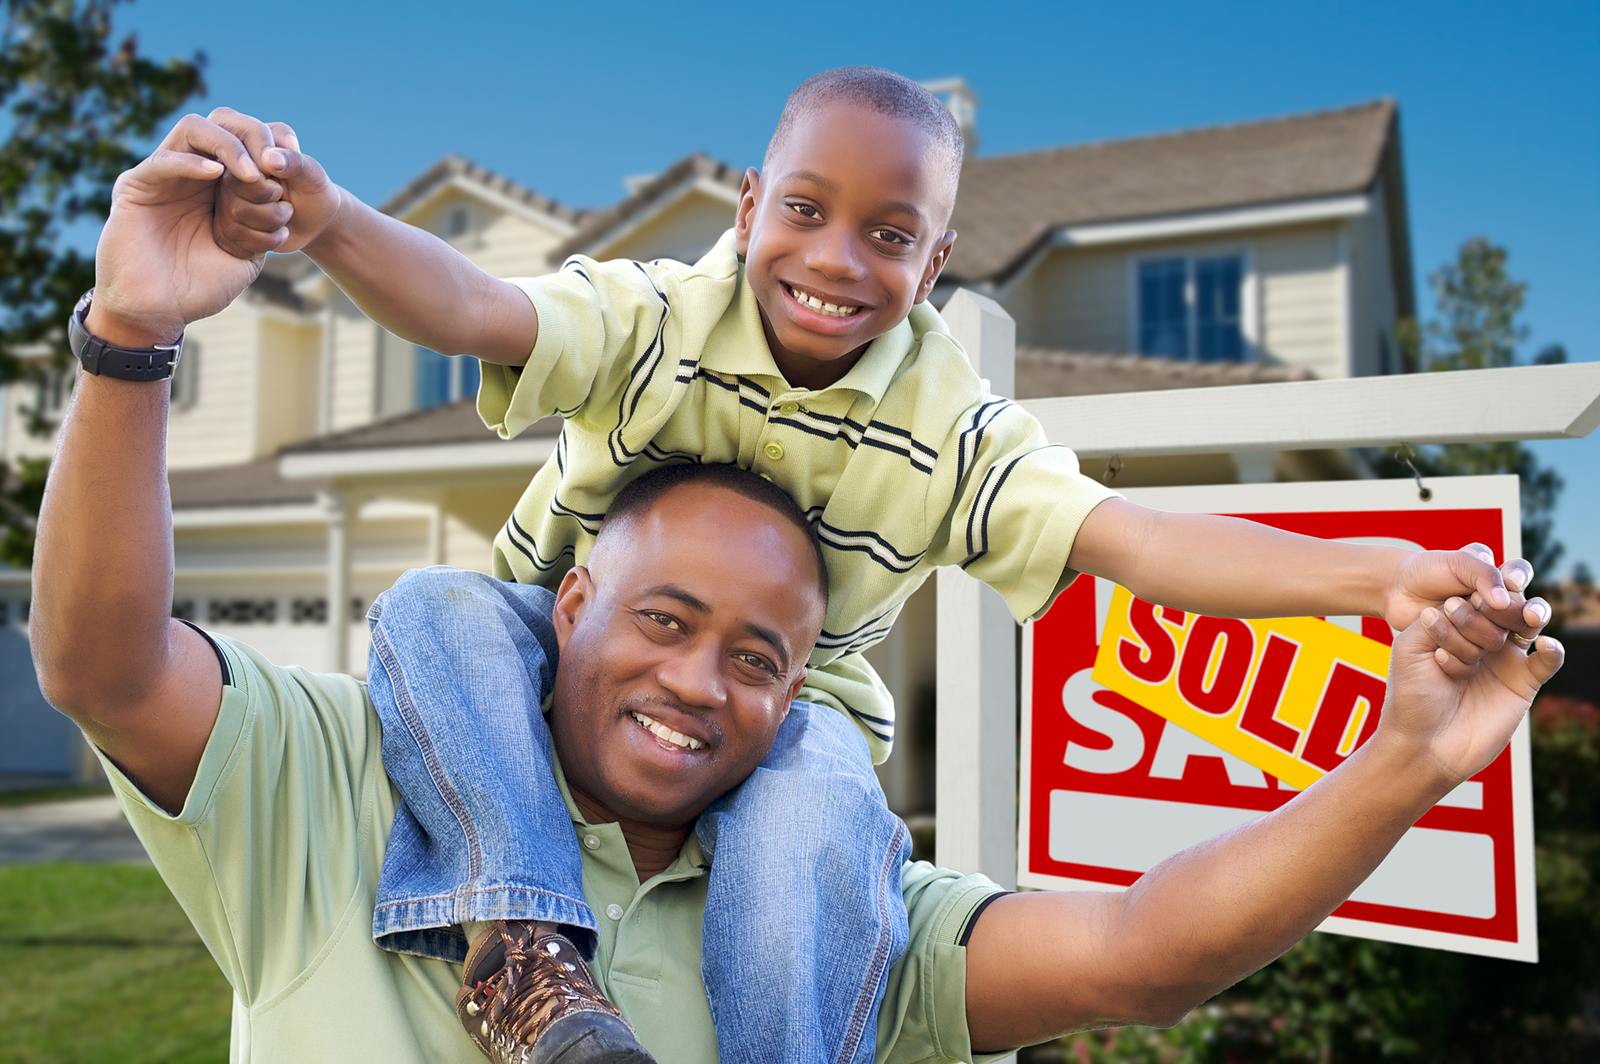 3 Tips On How To Make The Home Buying Process Less Stressful